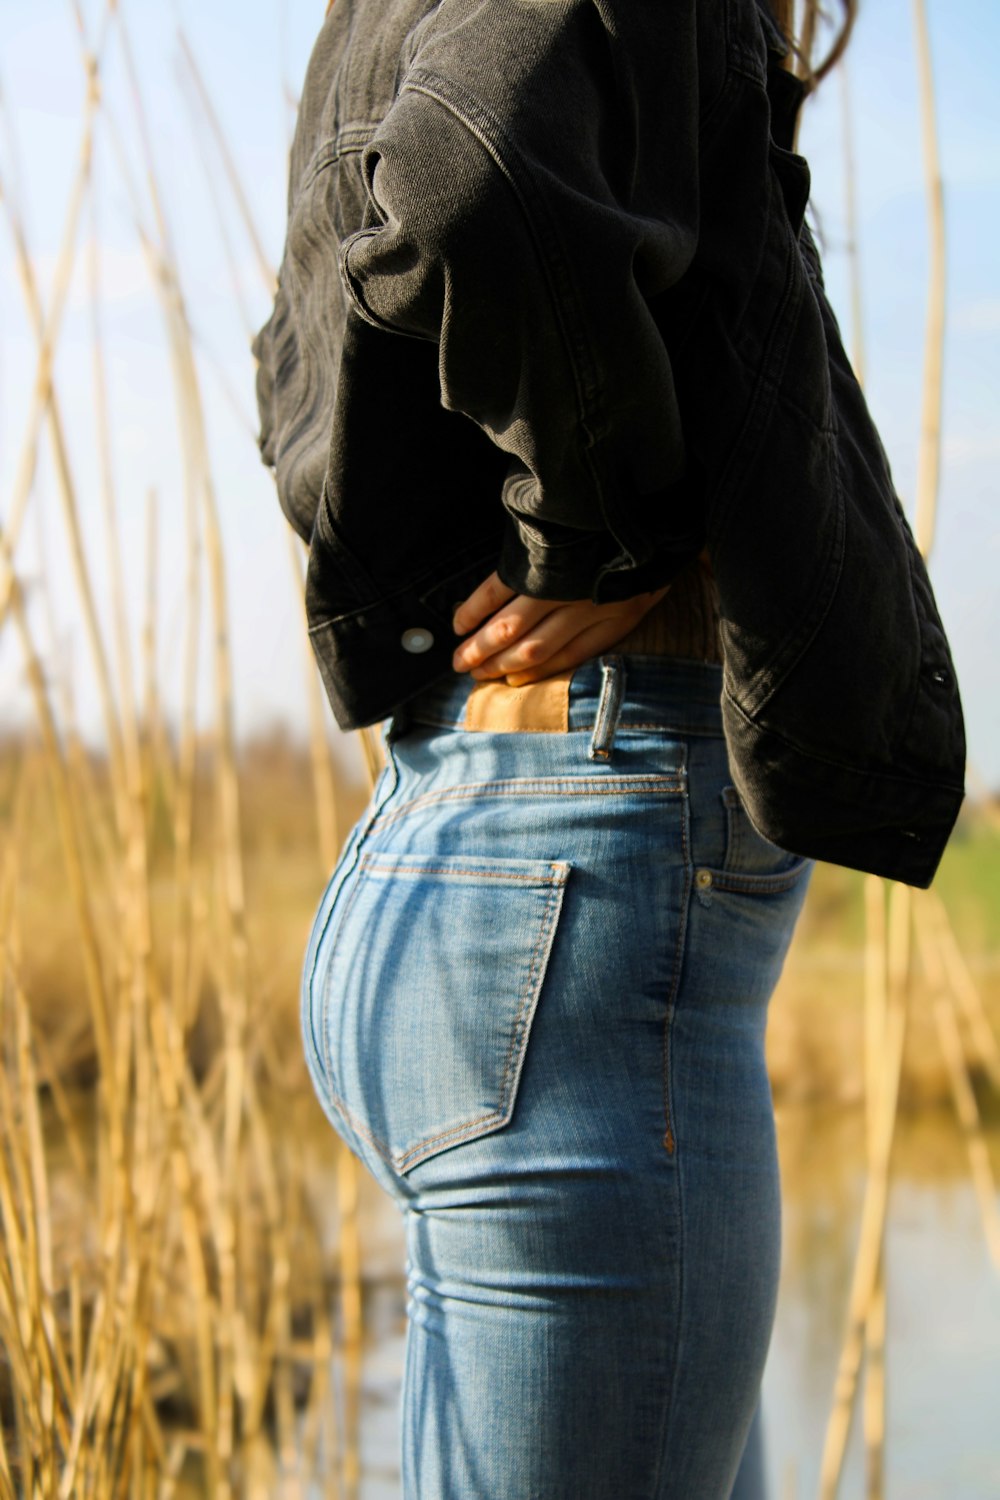 person in black jacket and blue denim jeans standing on grass field during daytime